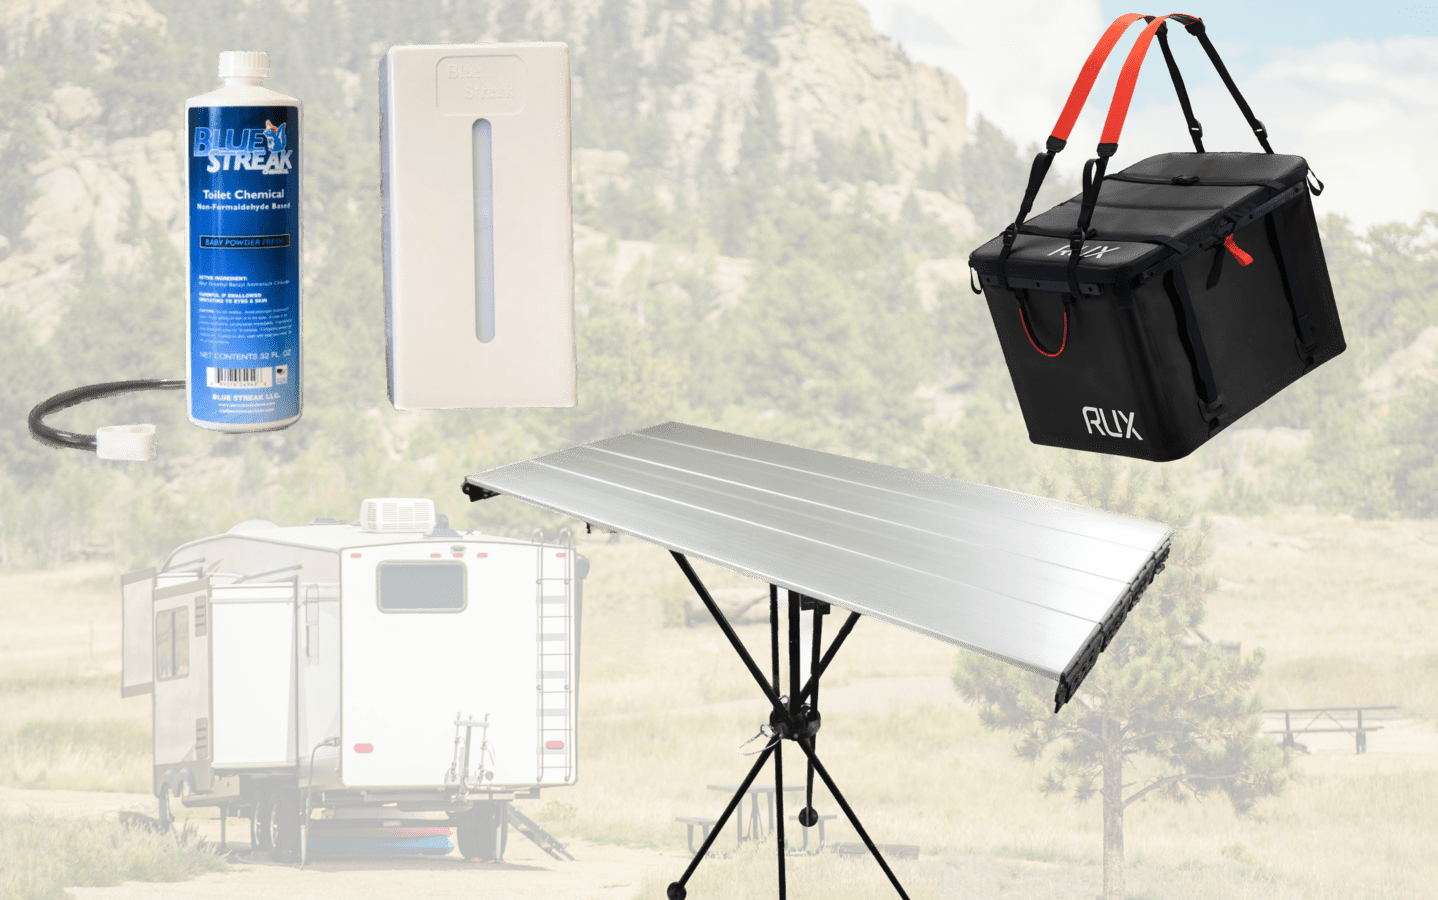 3 RV camping gadgets against a backdrop of an rv campsite